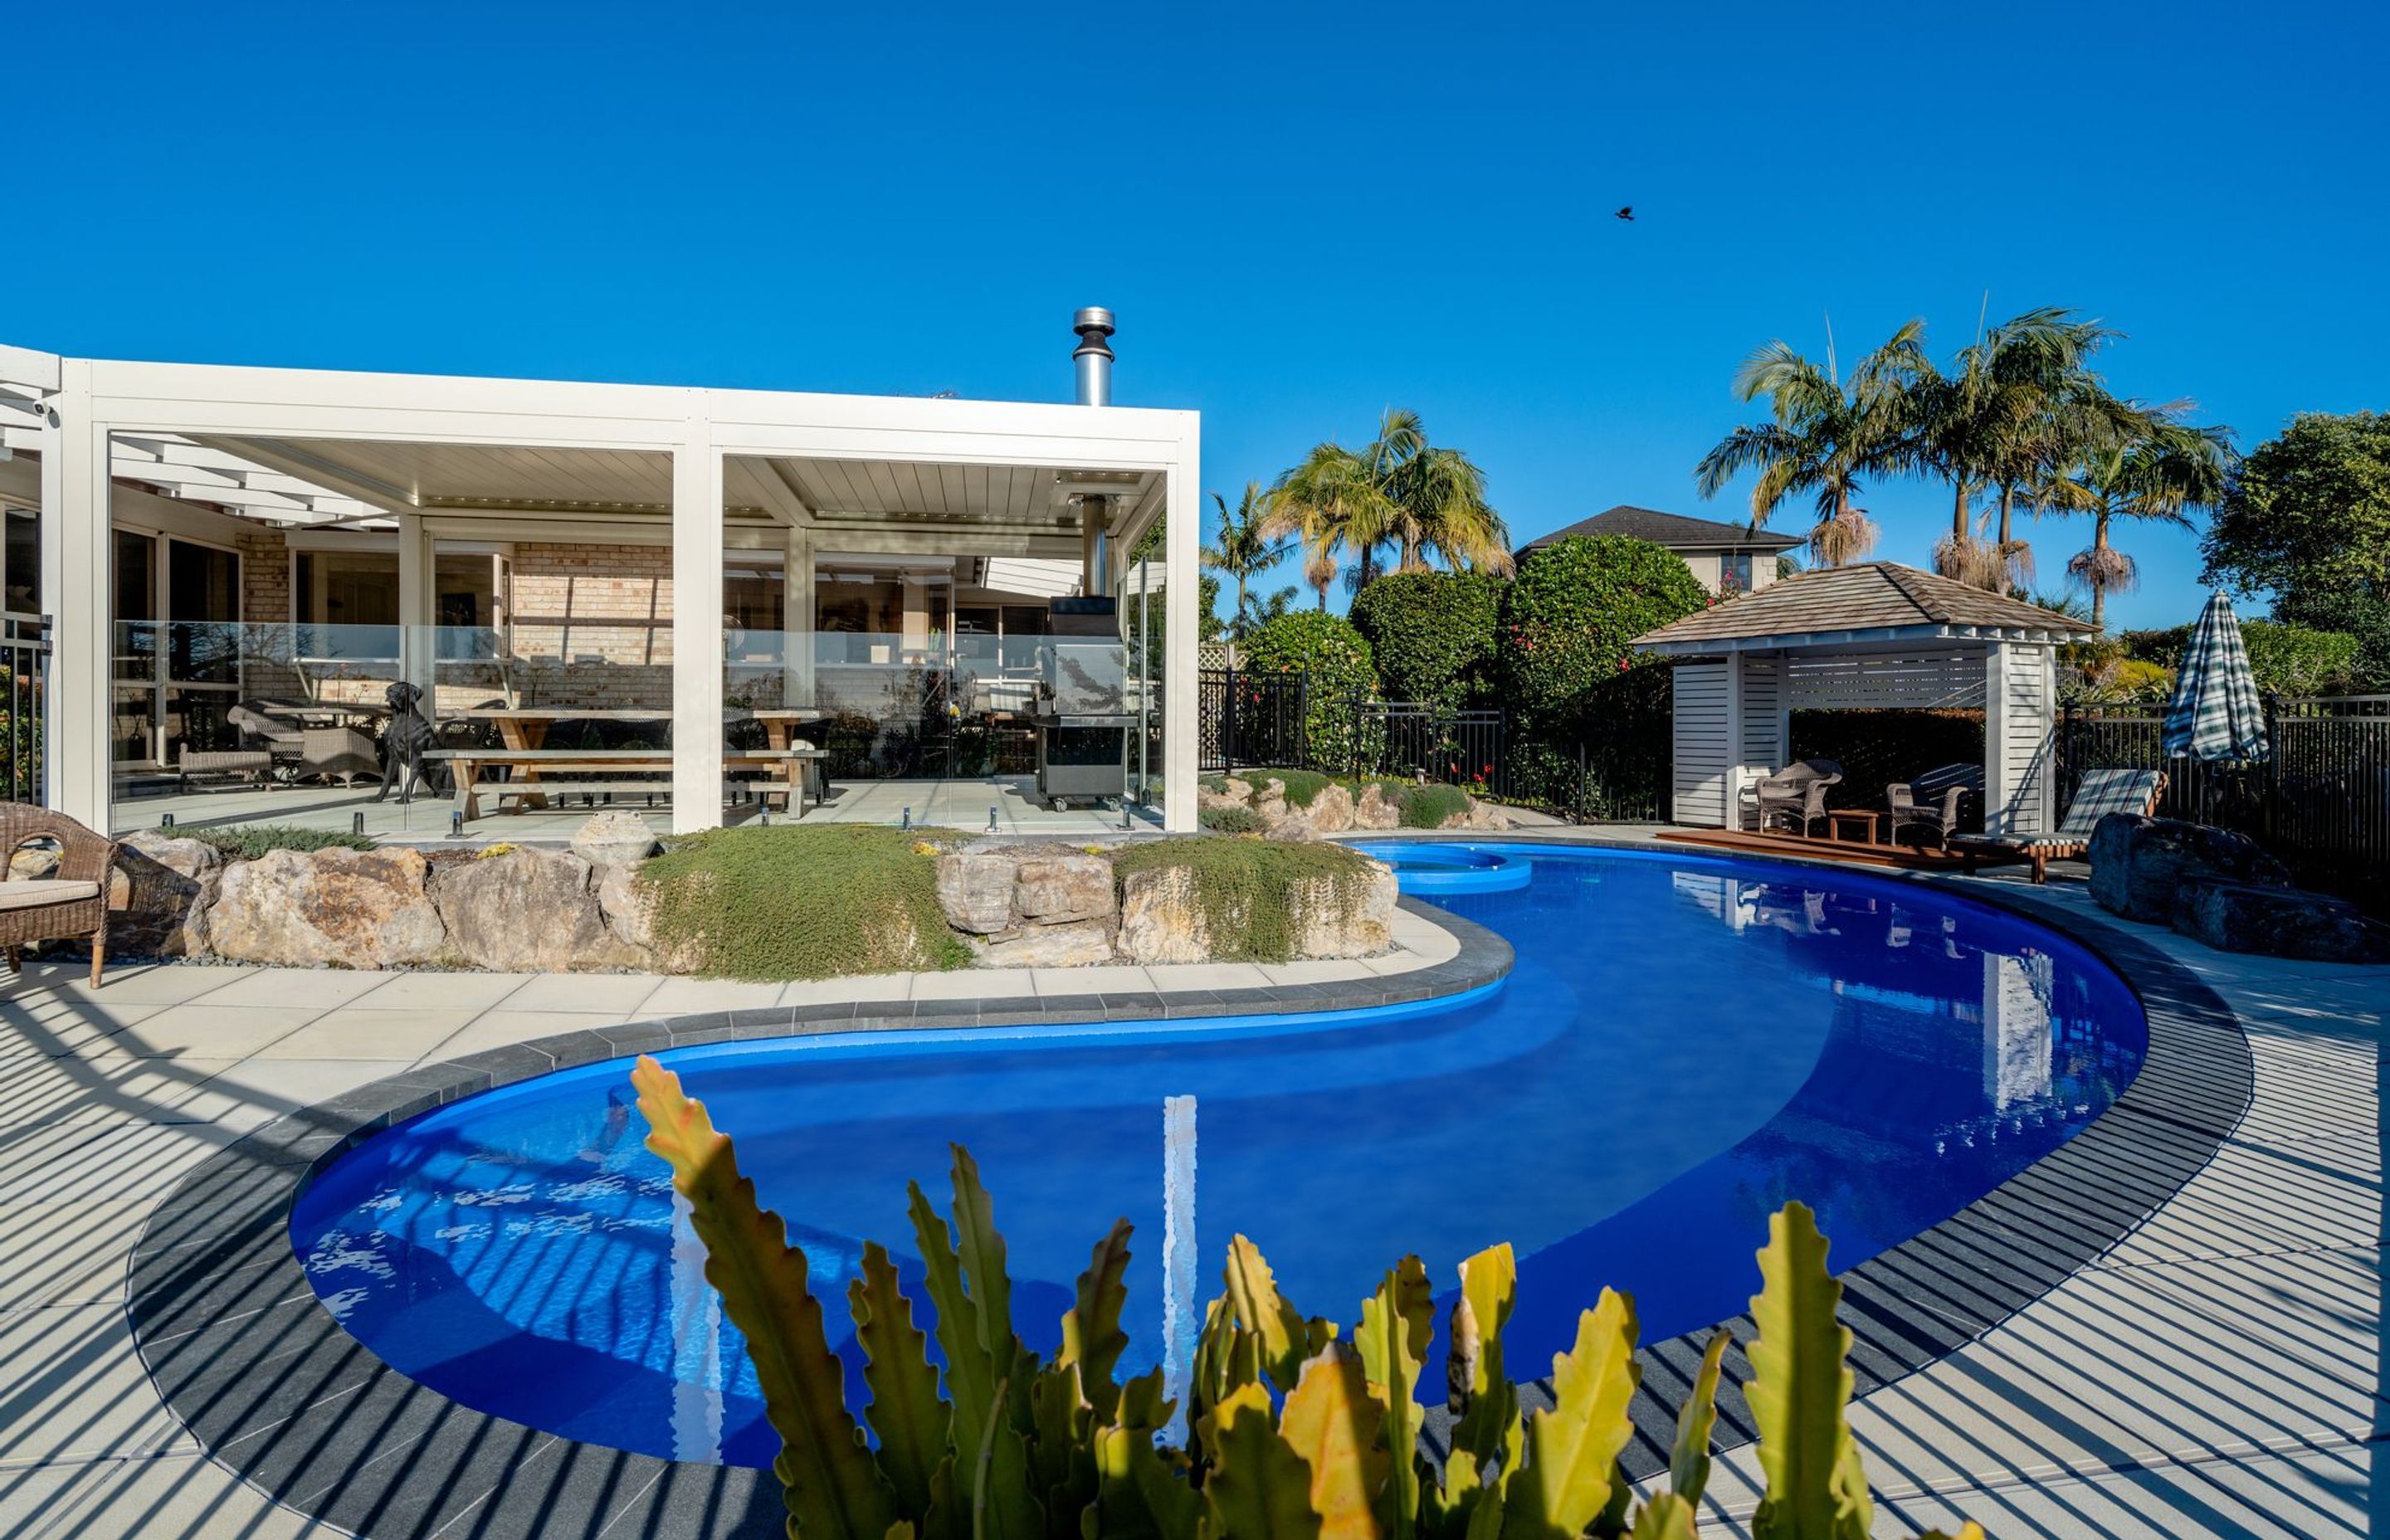 A resort-style oasis: A Tauranga pool's journey to Pool of the Year